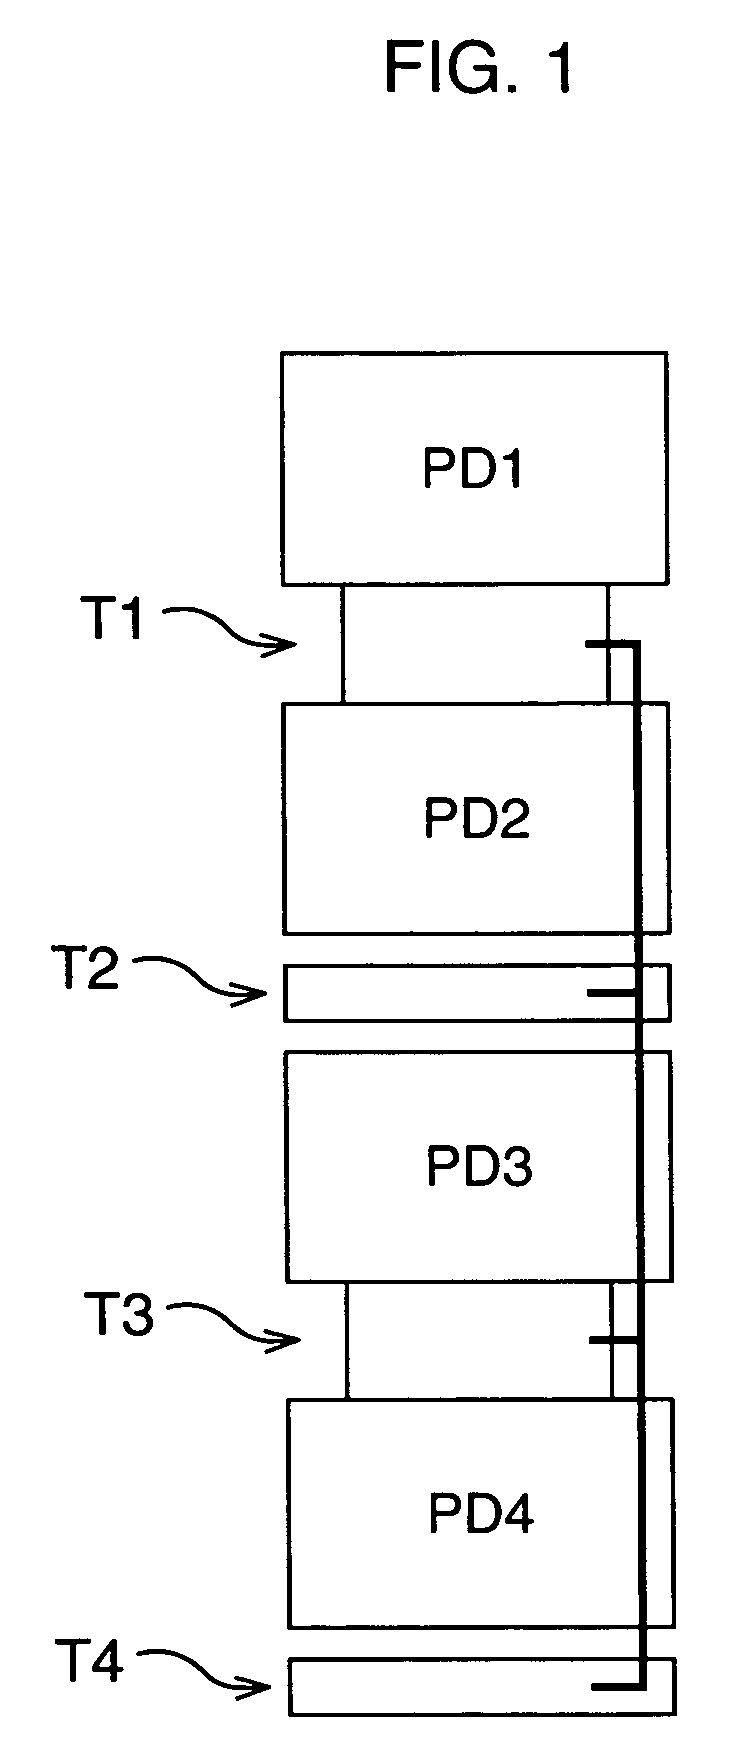 Semiconductor imaging device having a plurality of pixels arranged in a matrix-like pattern